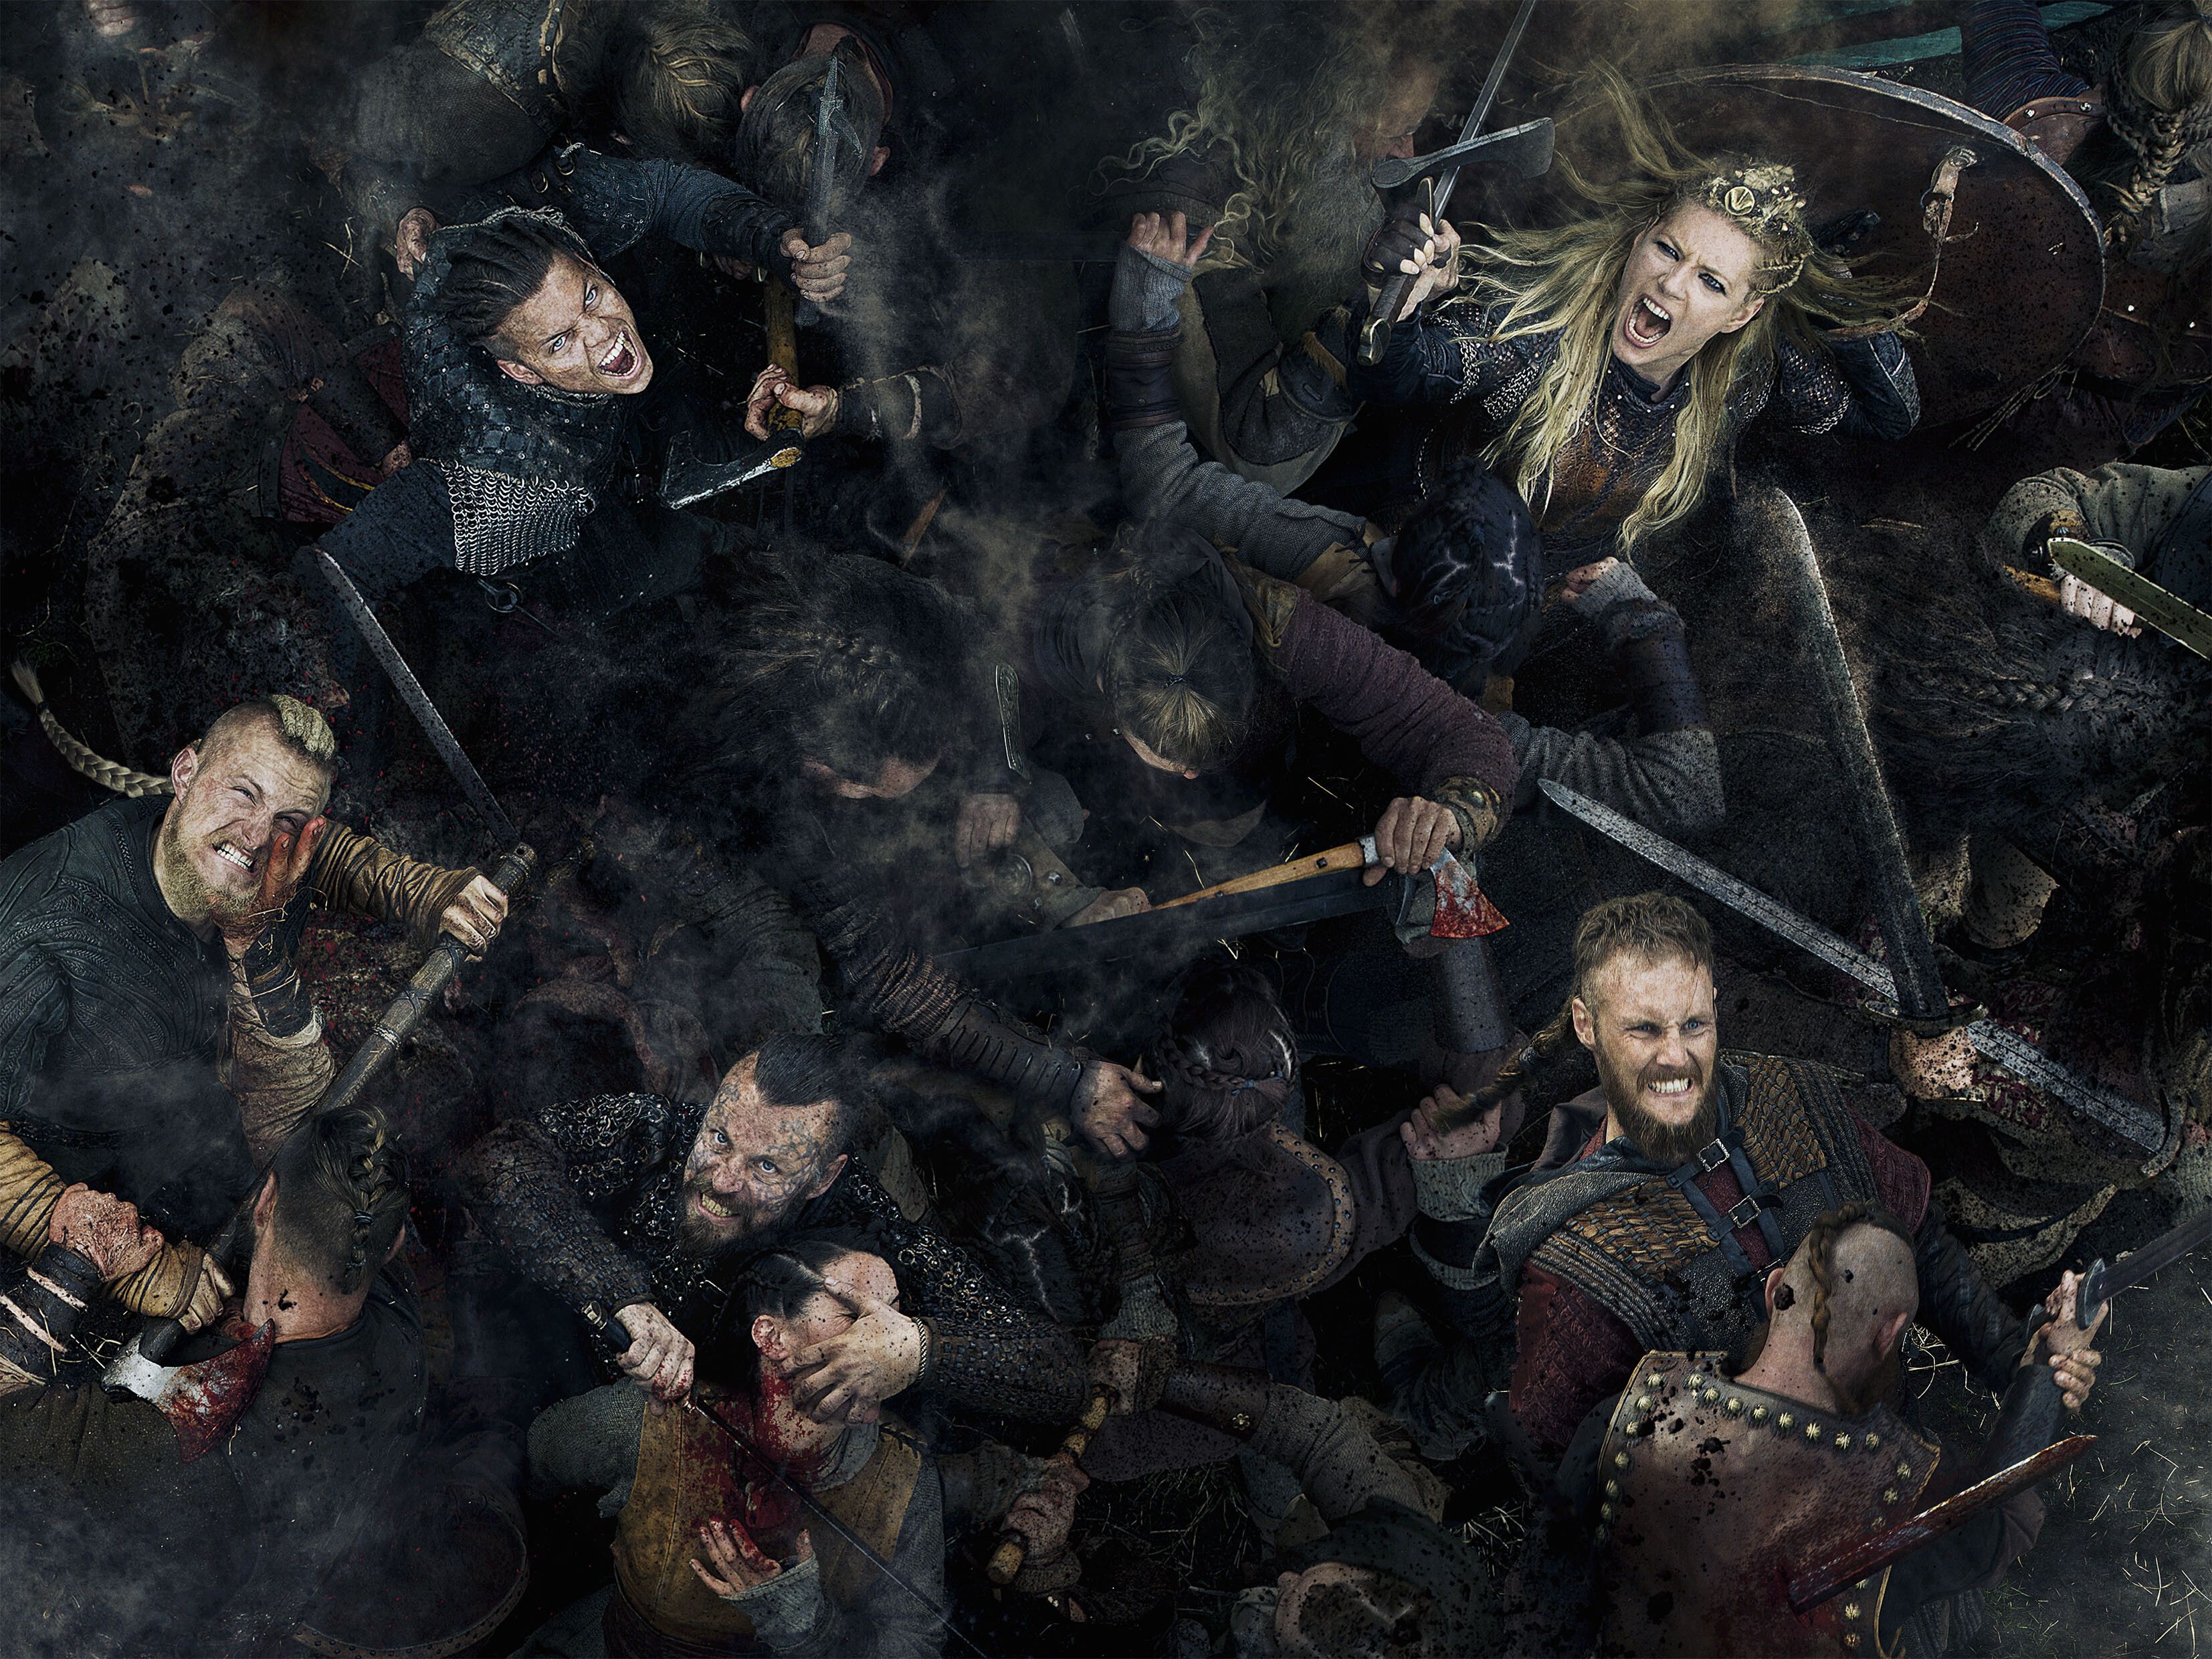 Vikings Wallpaper: HD, 4K, 5K for PC and Mobile. Download free image for iPhone, Android